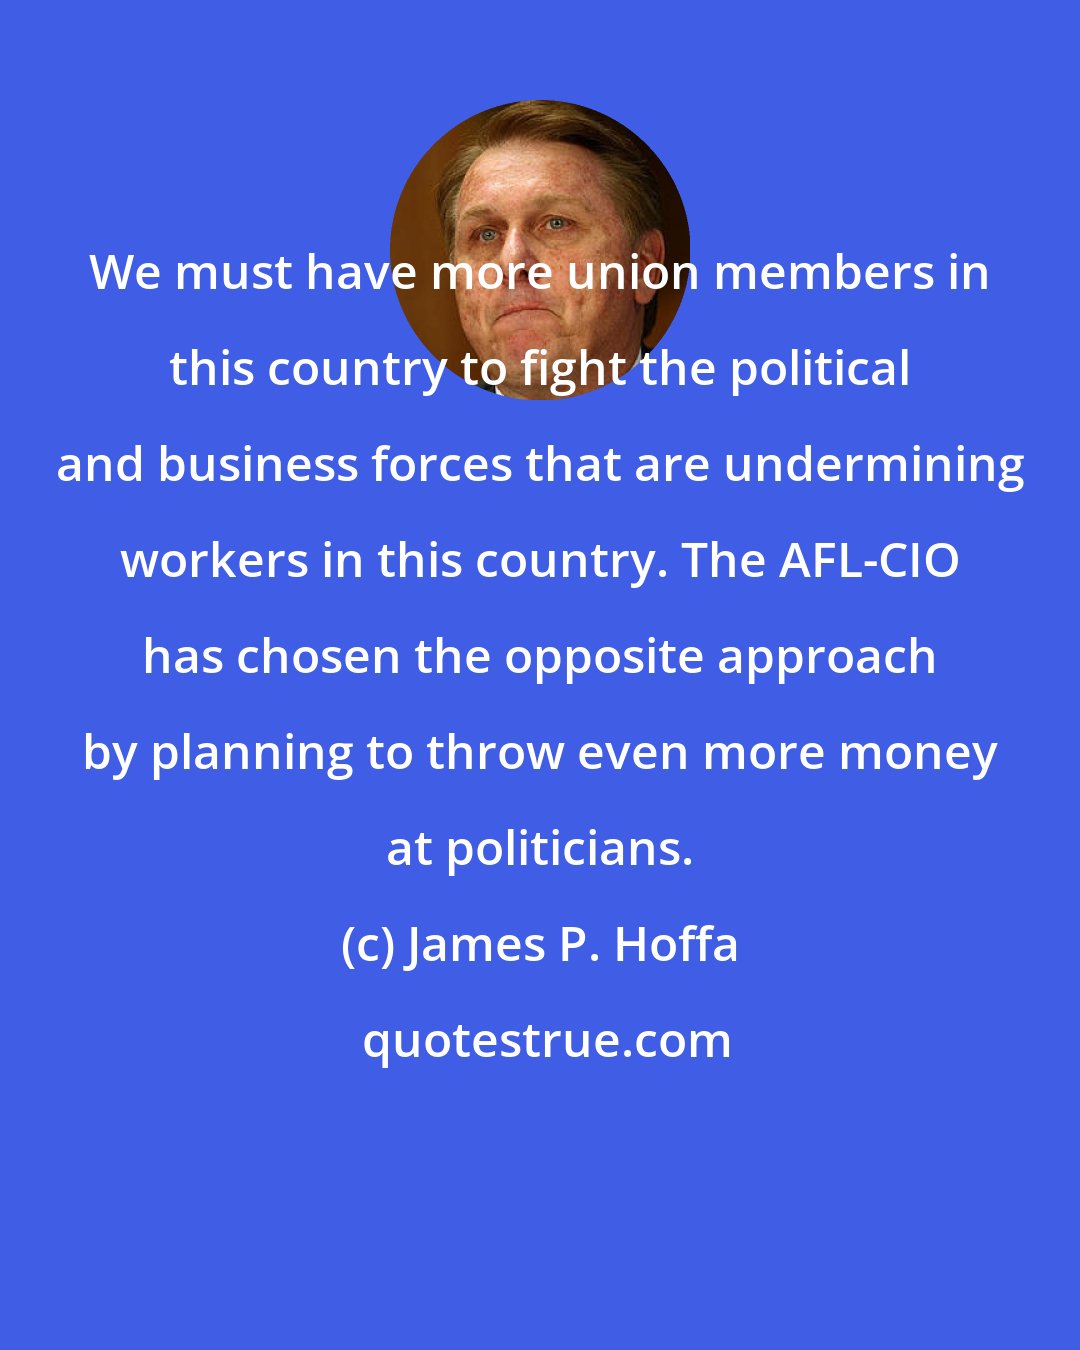 James P. Hoffa: We must have more union members in this country to fight the political and business forces that are undermining workers in this country. The AFL-CIO has chosen the opposite approach by planning to throw even more money at politicians.